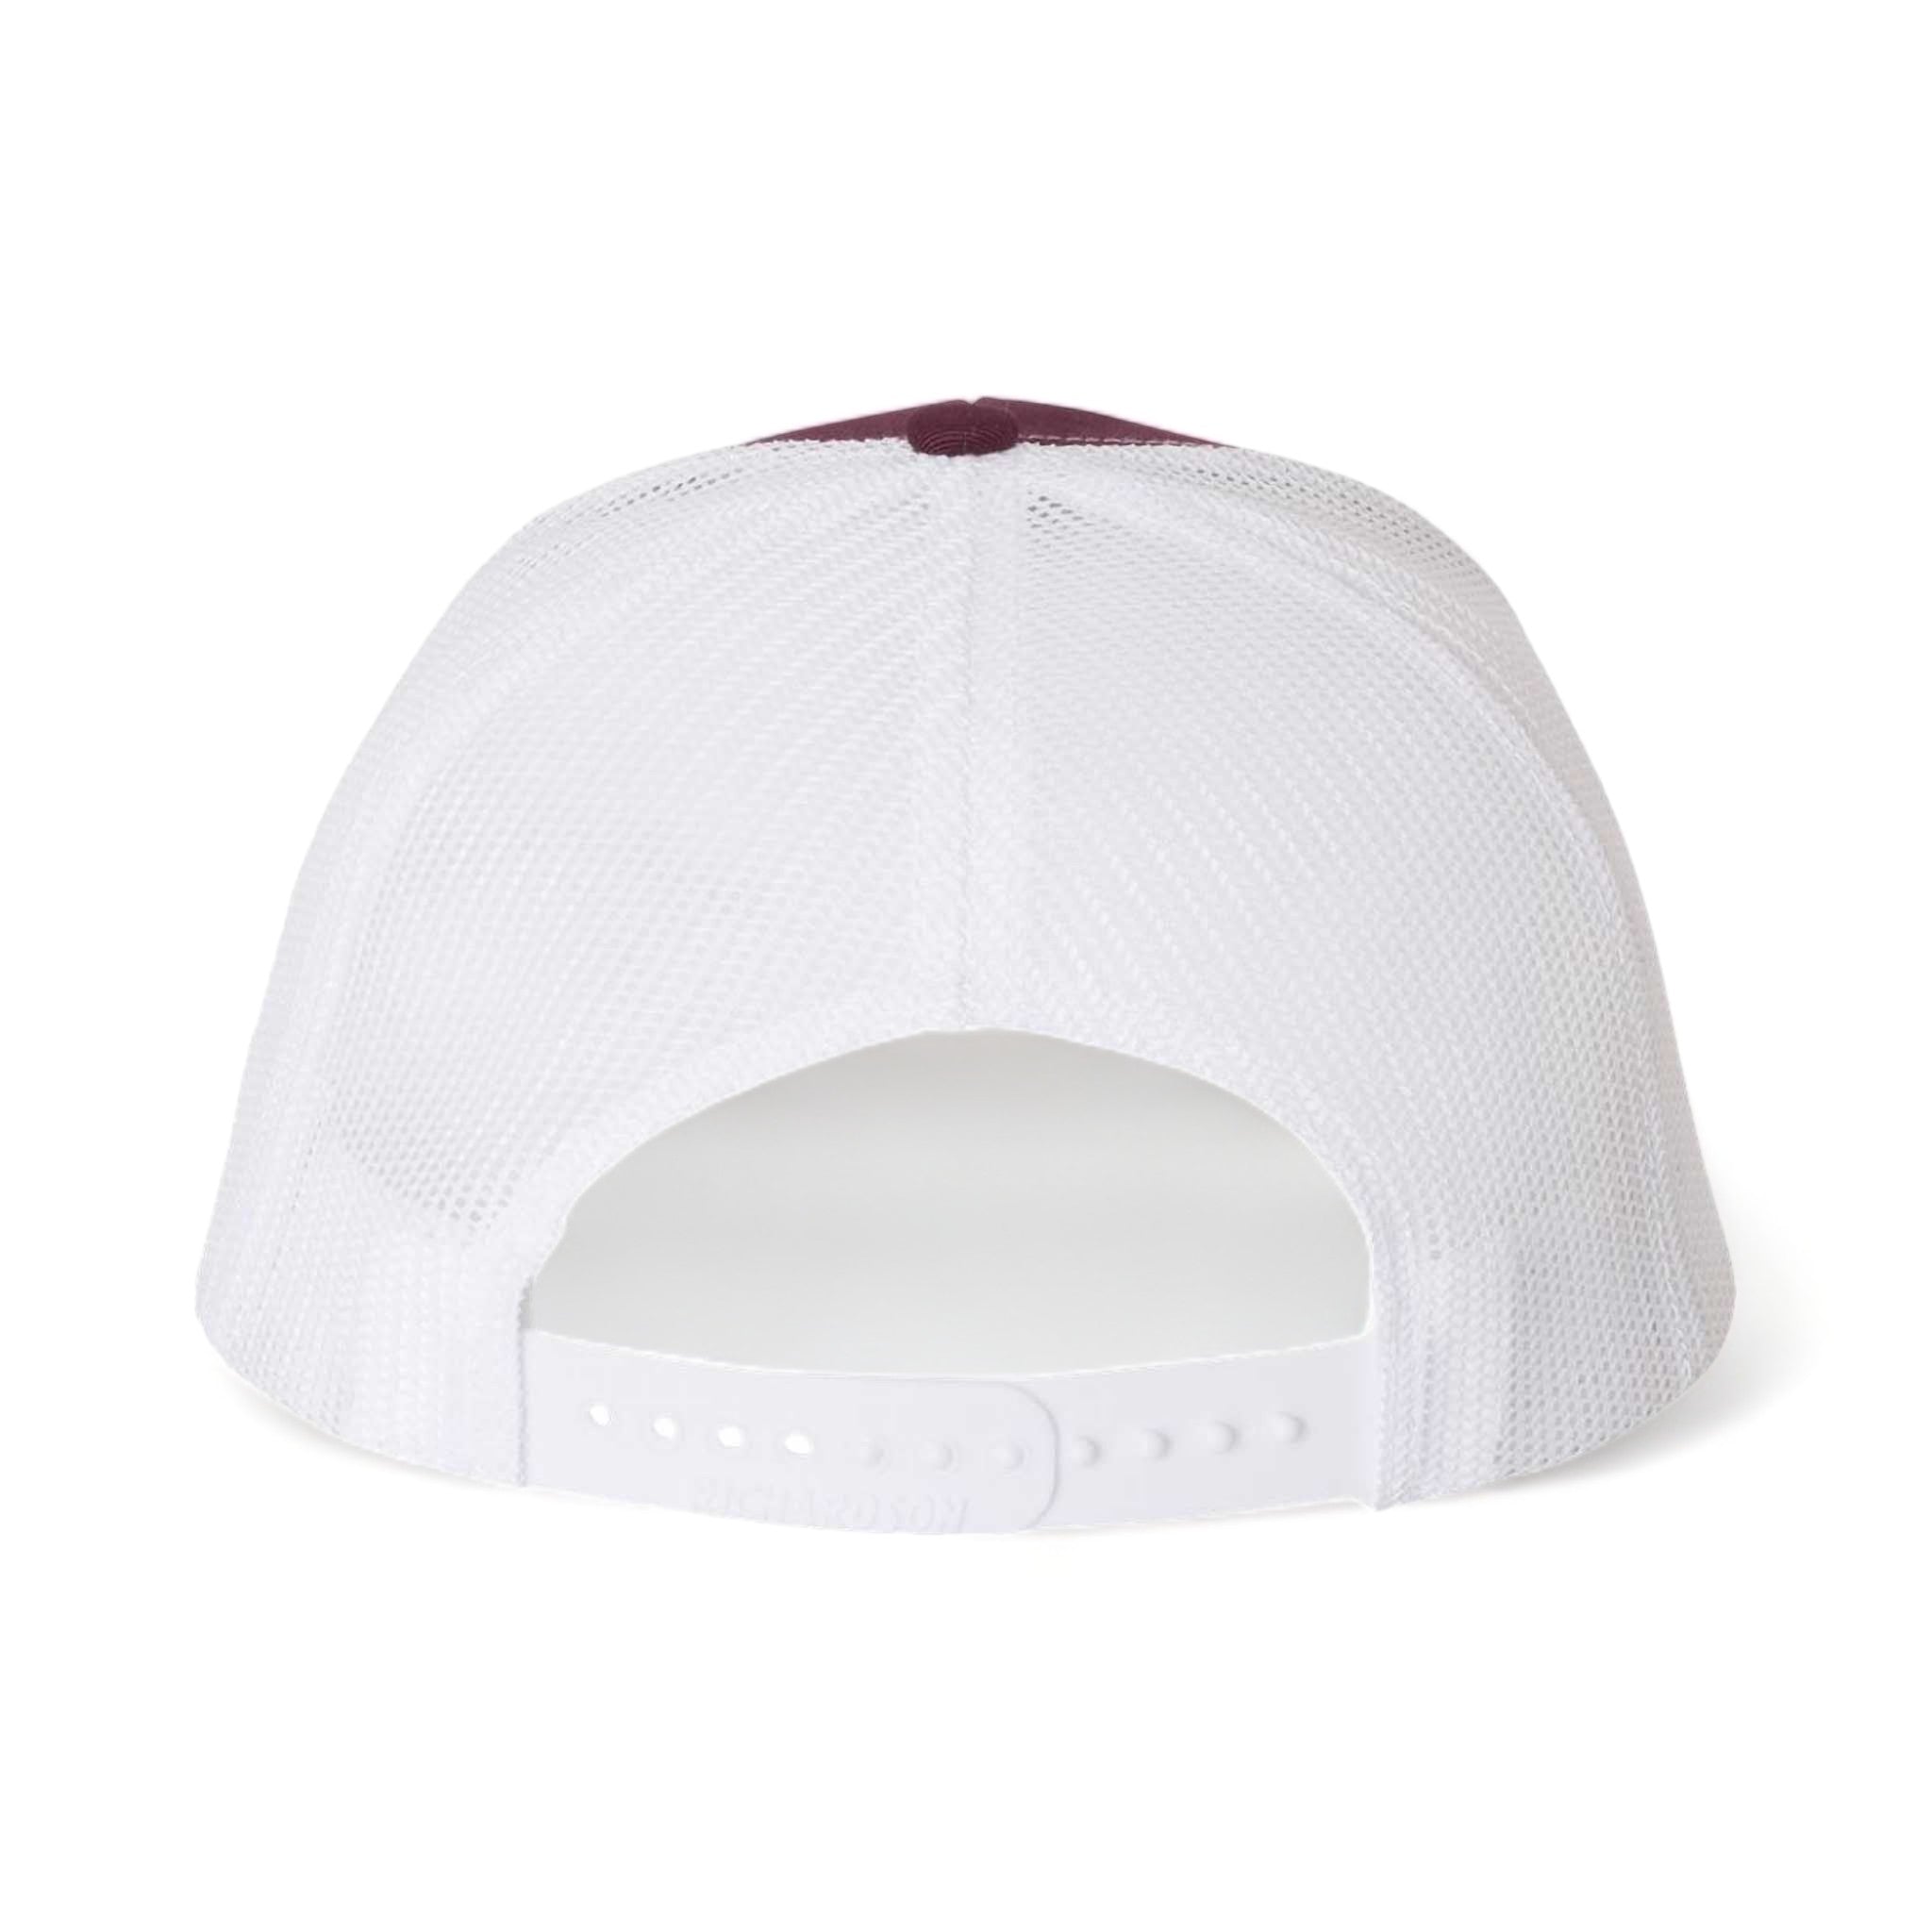 Back view of Richardson 112 custom hat in maroon and white